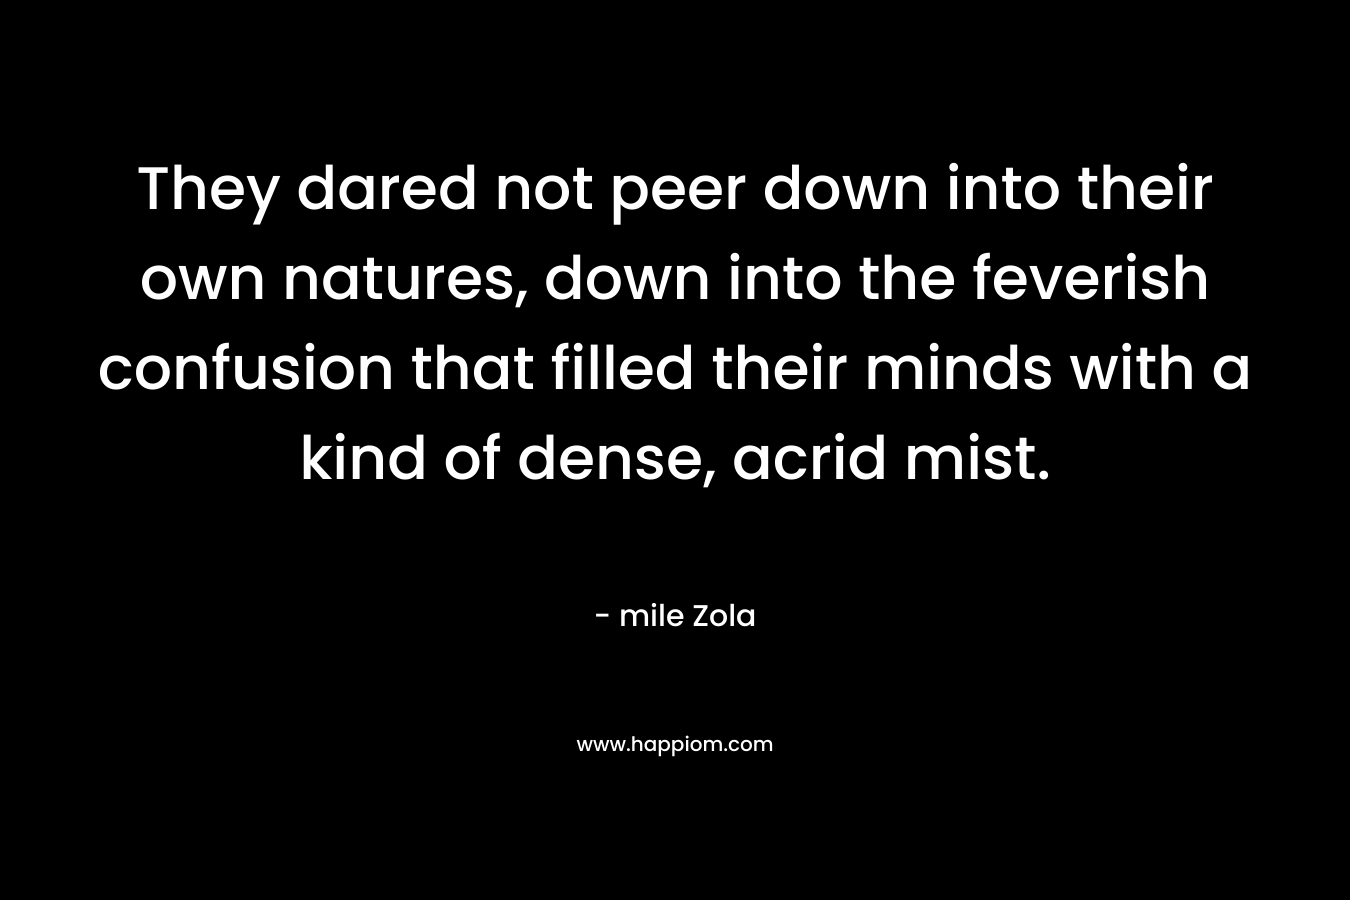 They dared not peer down into their own natures, down into the feverish confusion that filled their minds with a kind of dense, acrid mist. – mile Zola